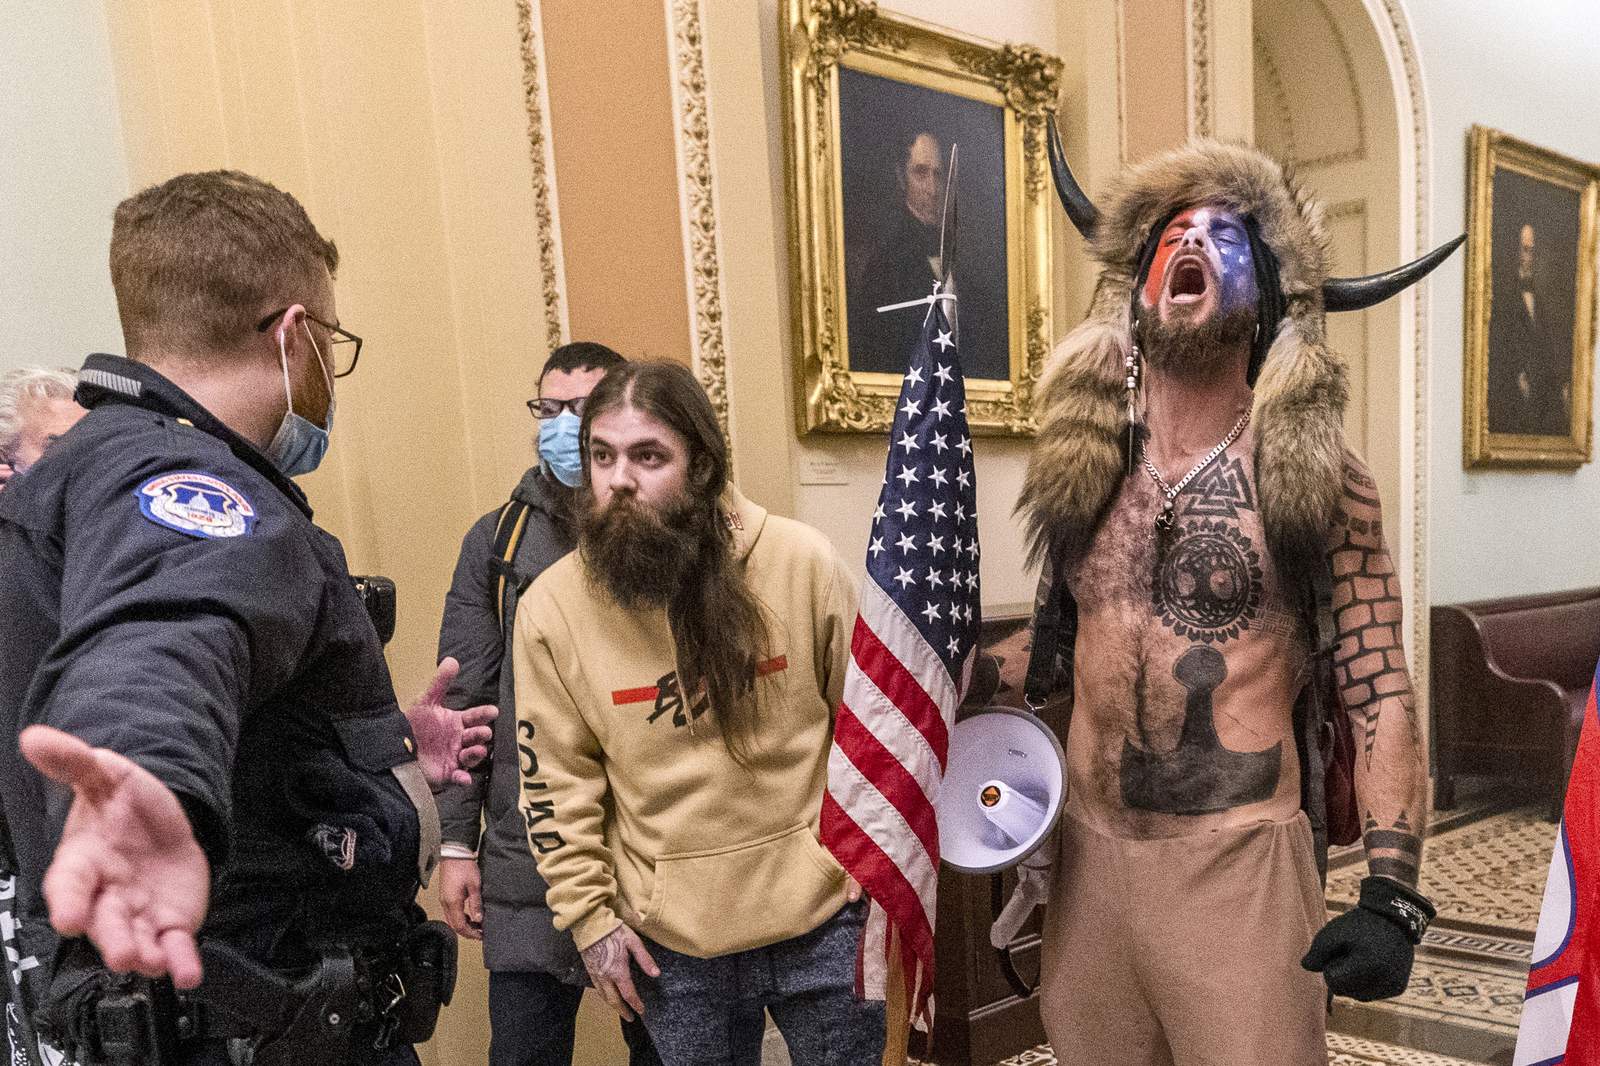 Man who wore horns in US Capitol riot moved to Virginia jail